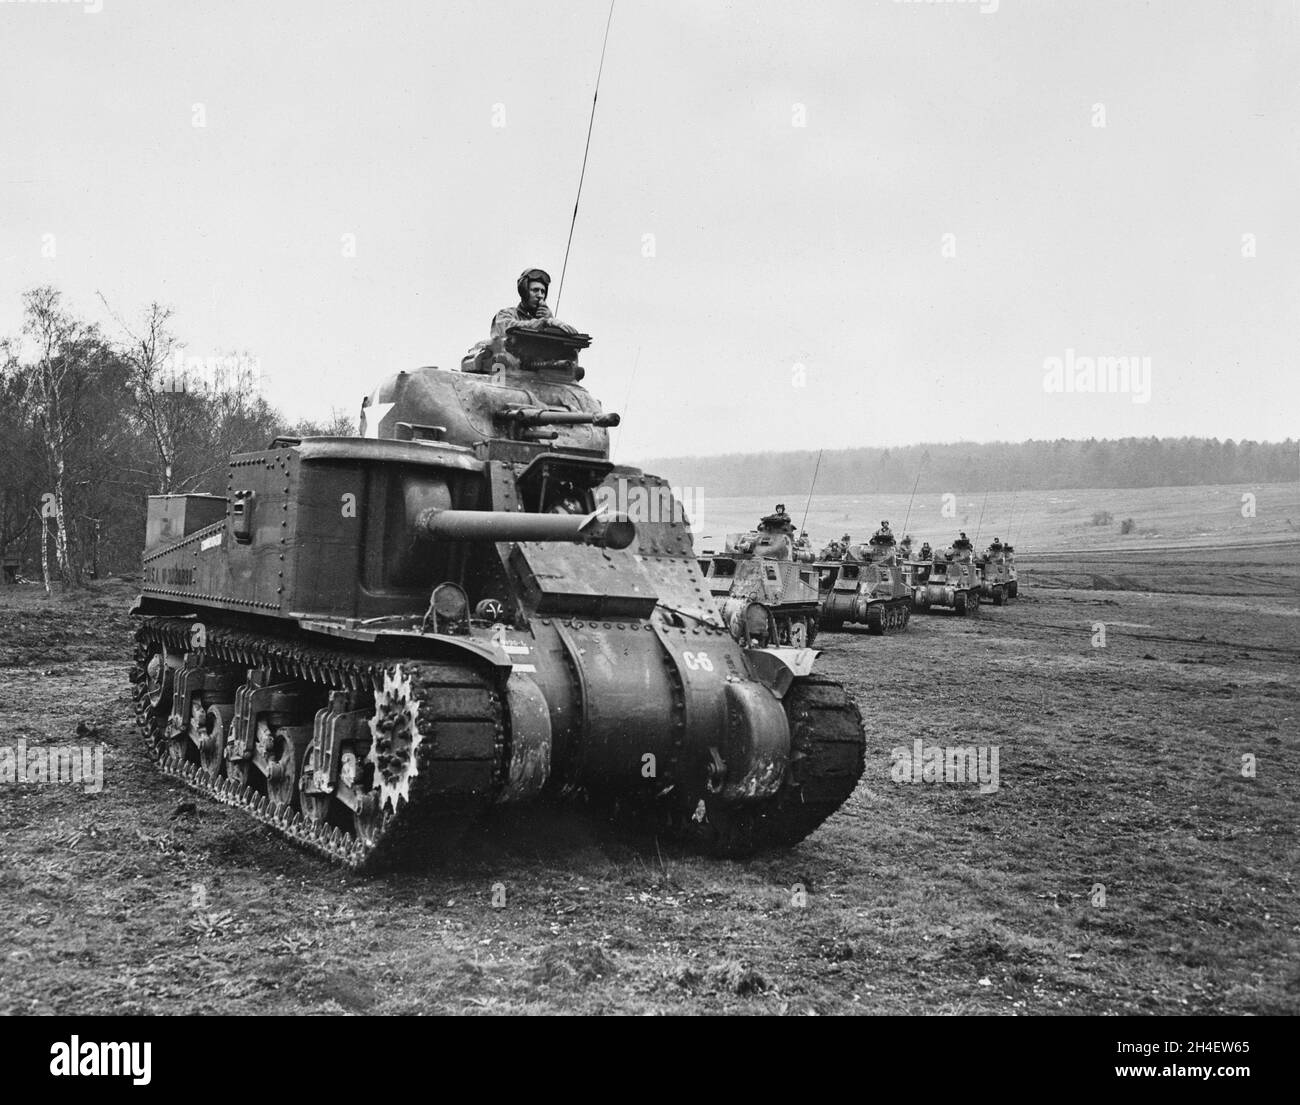 A vintage photo circa 1942 a line of American M3 General Lee or Lee medium tanks on training maneuvers in England during World War 2.  Built from August 1941 to December 1942 it served in all major theatres during WW2. Stock Photo